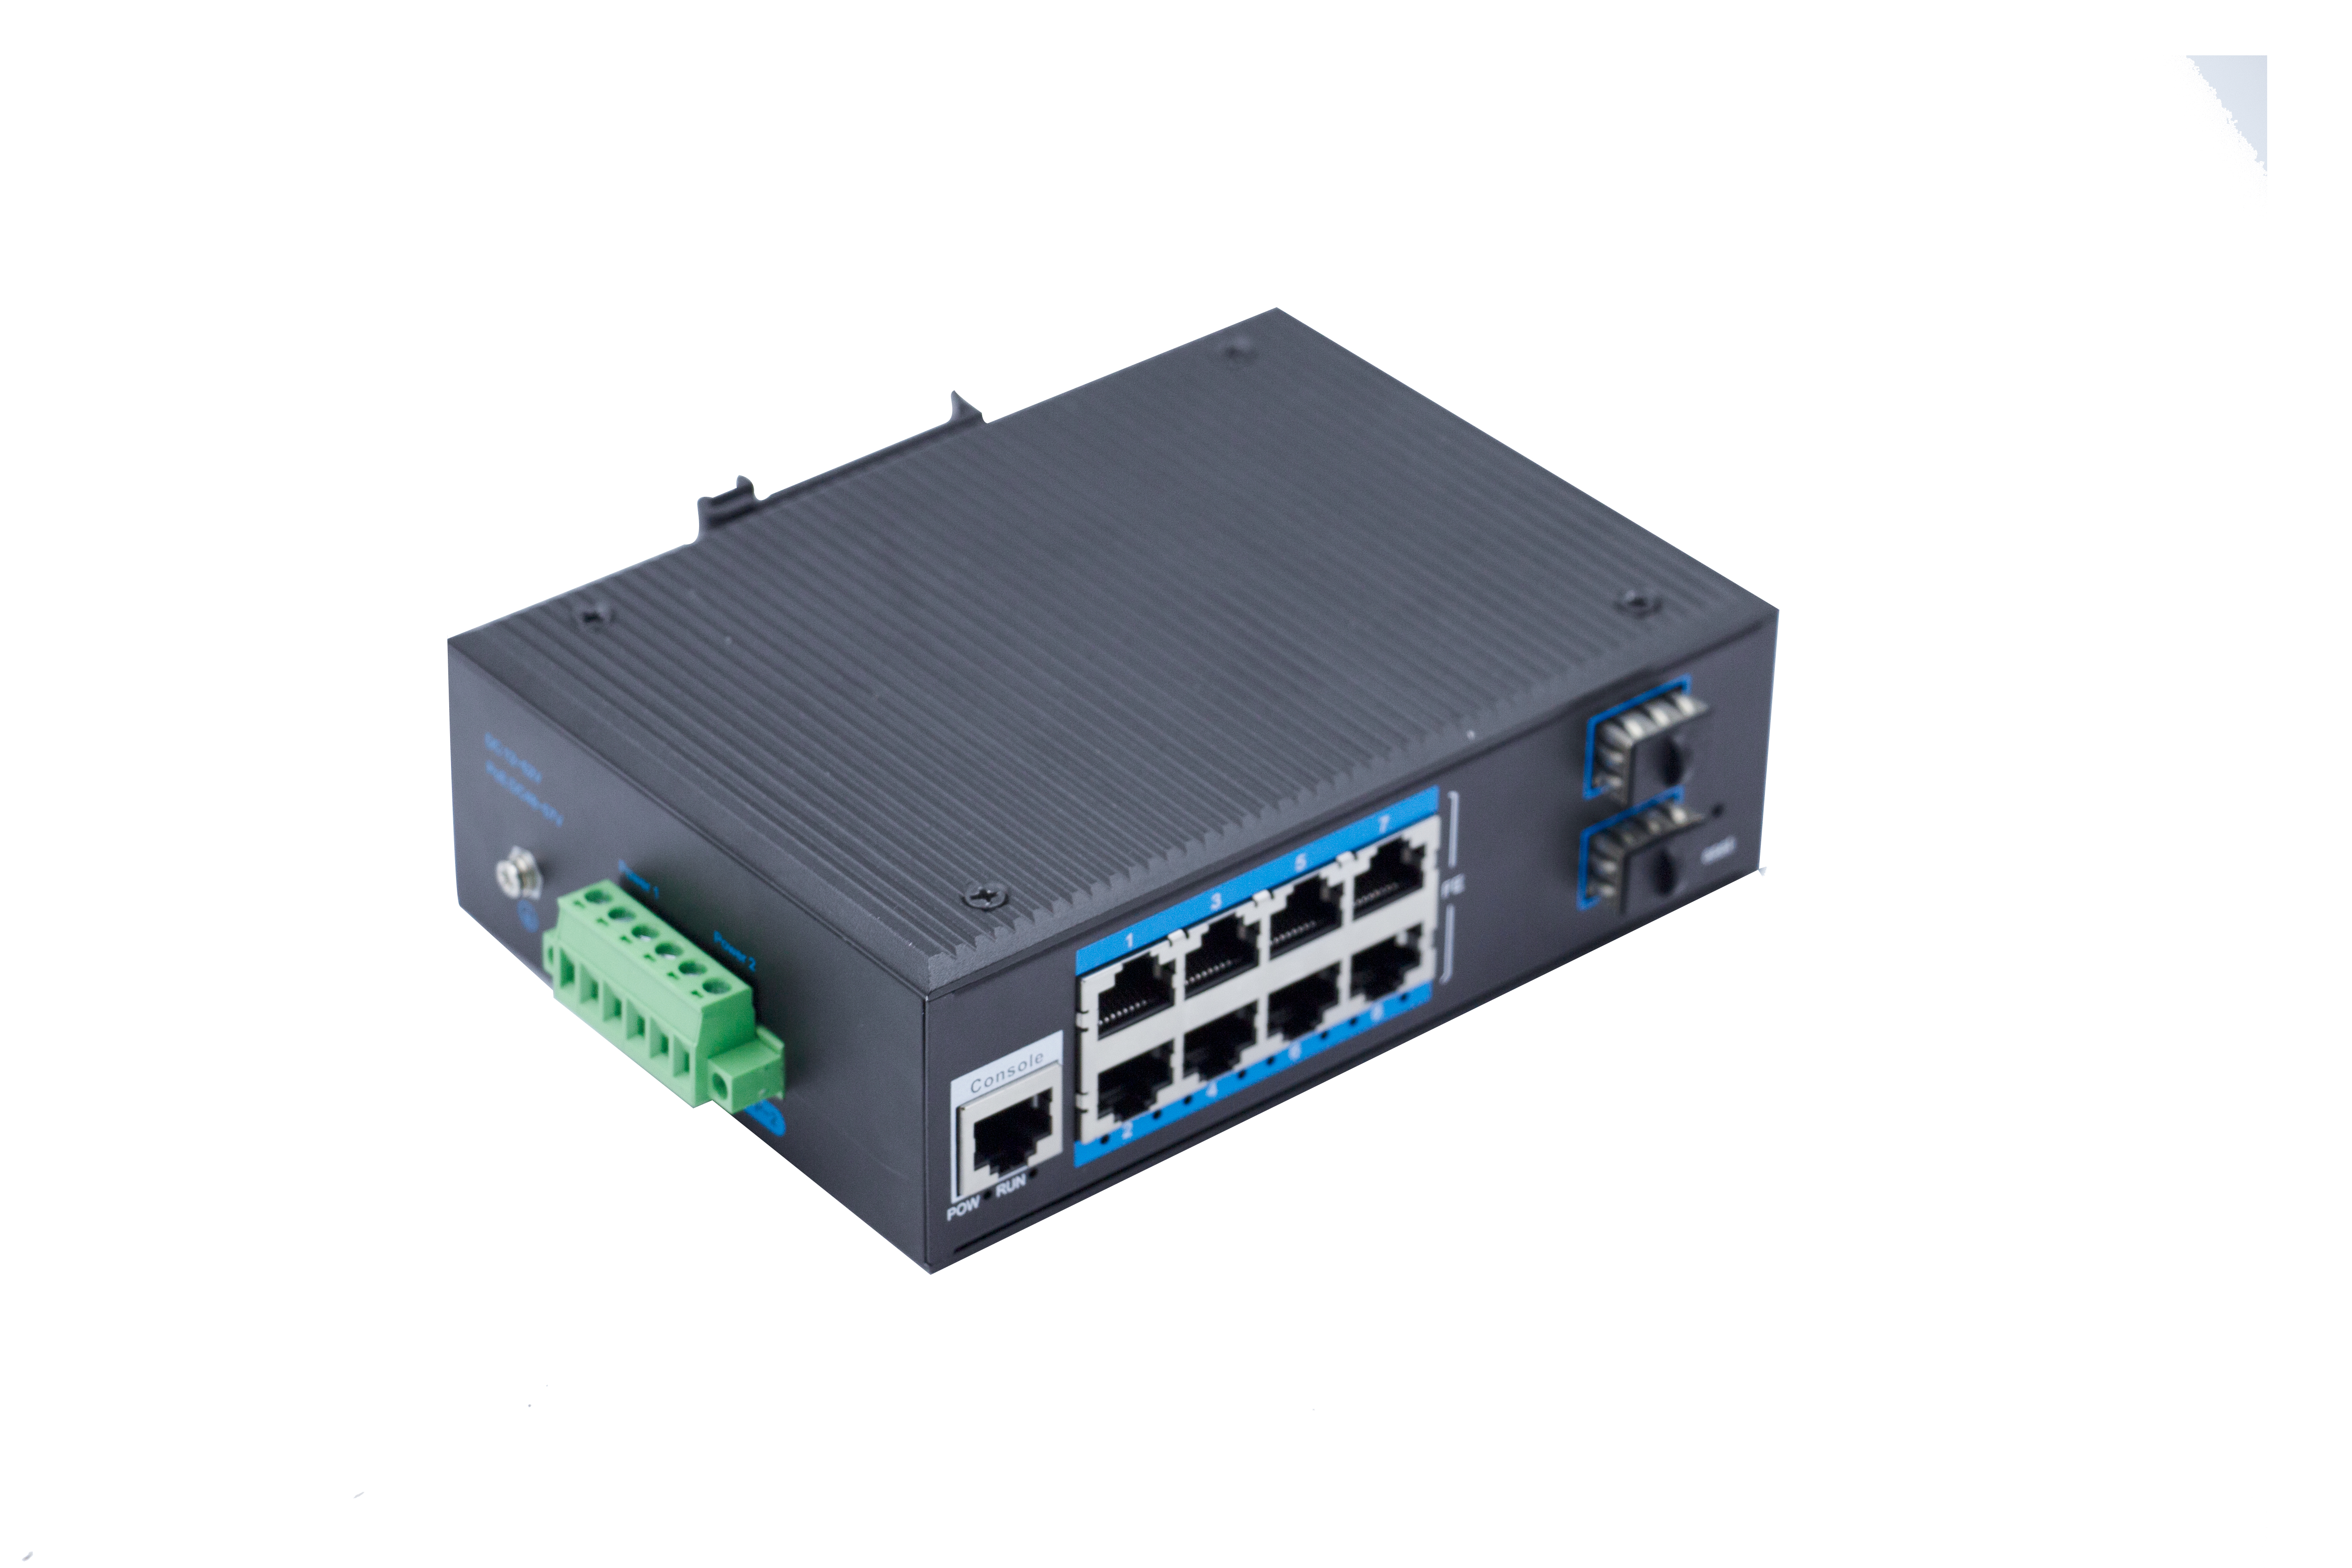 How Does a Fast Ethernet Switch Improve Network Performance?